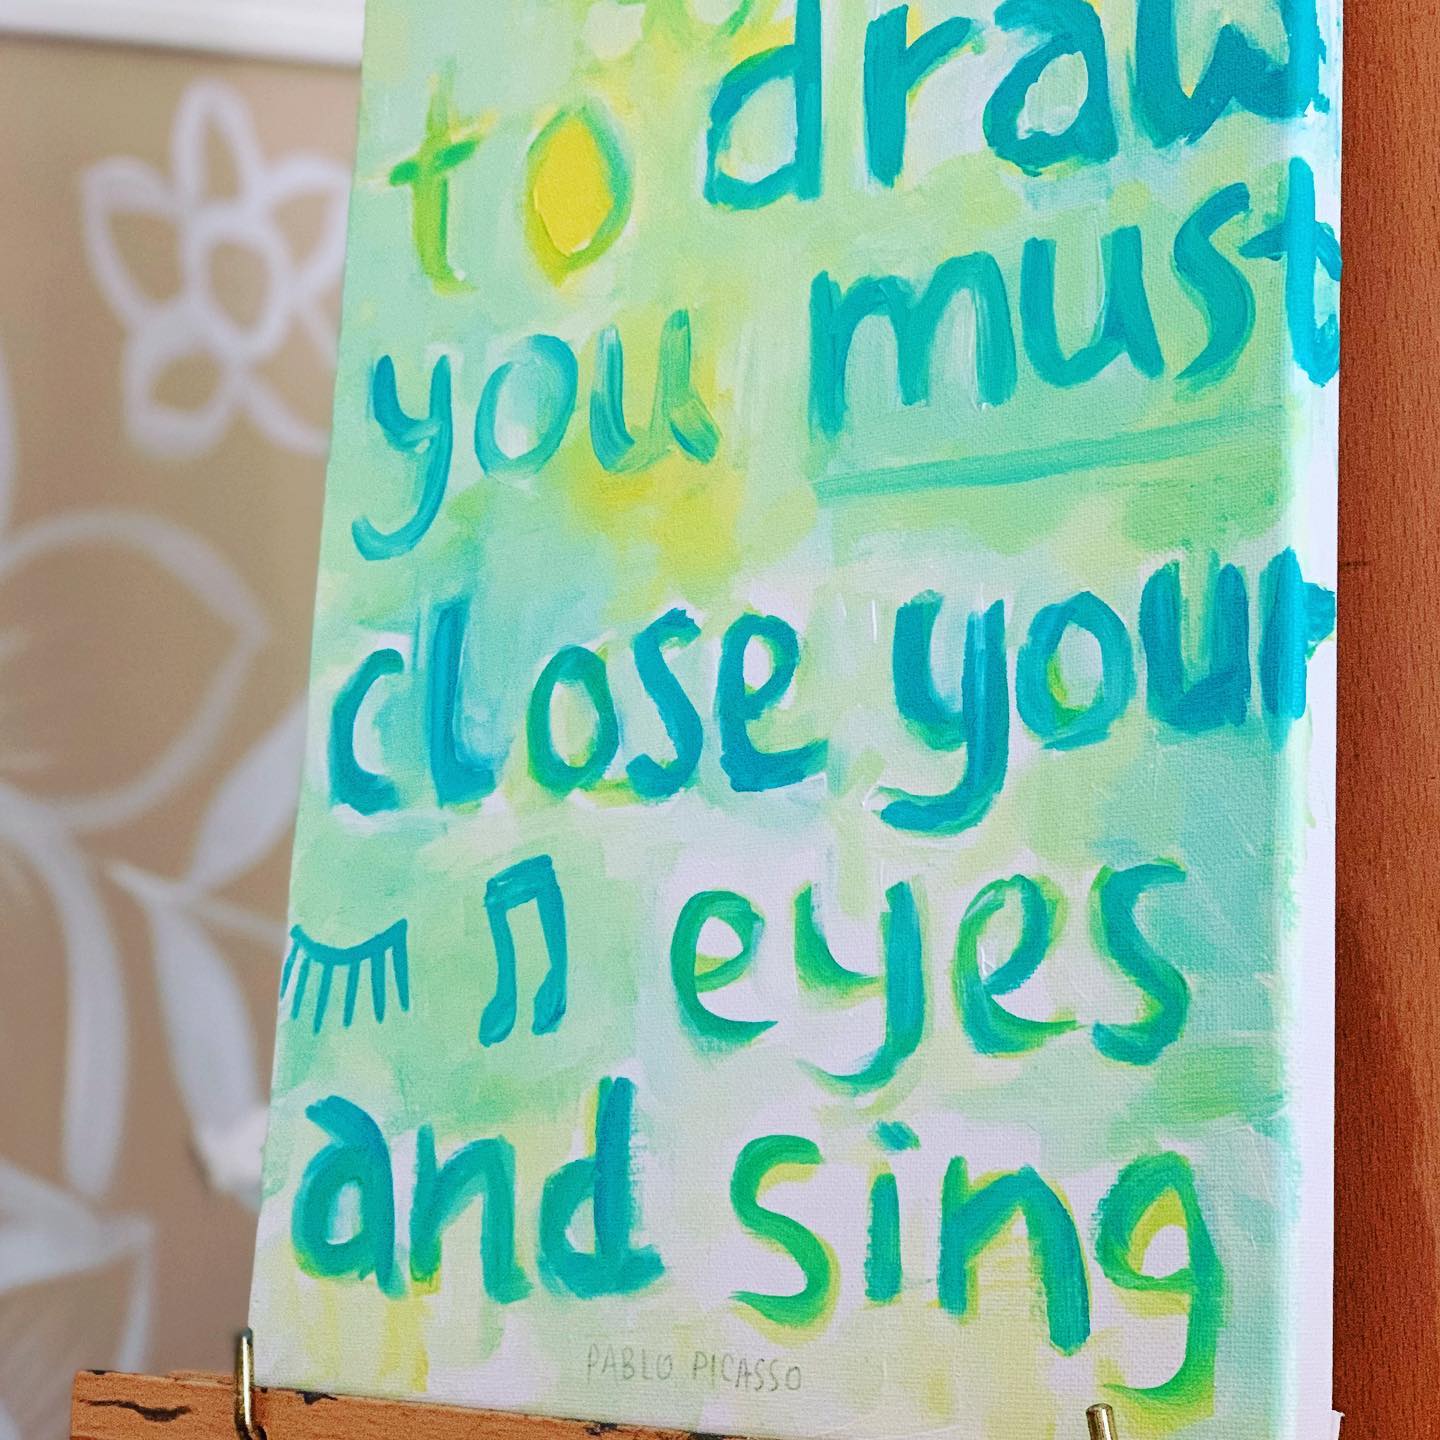 To draw you must 
close your eyes
and sing.

 Pablo Picasso